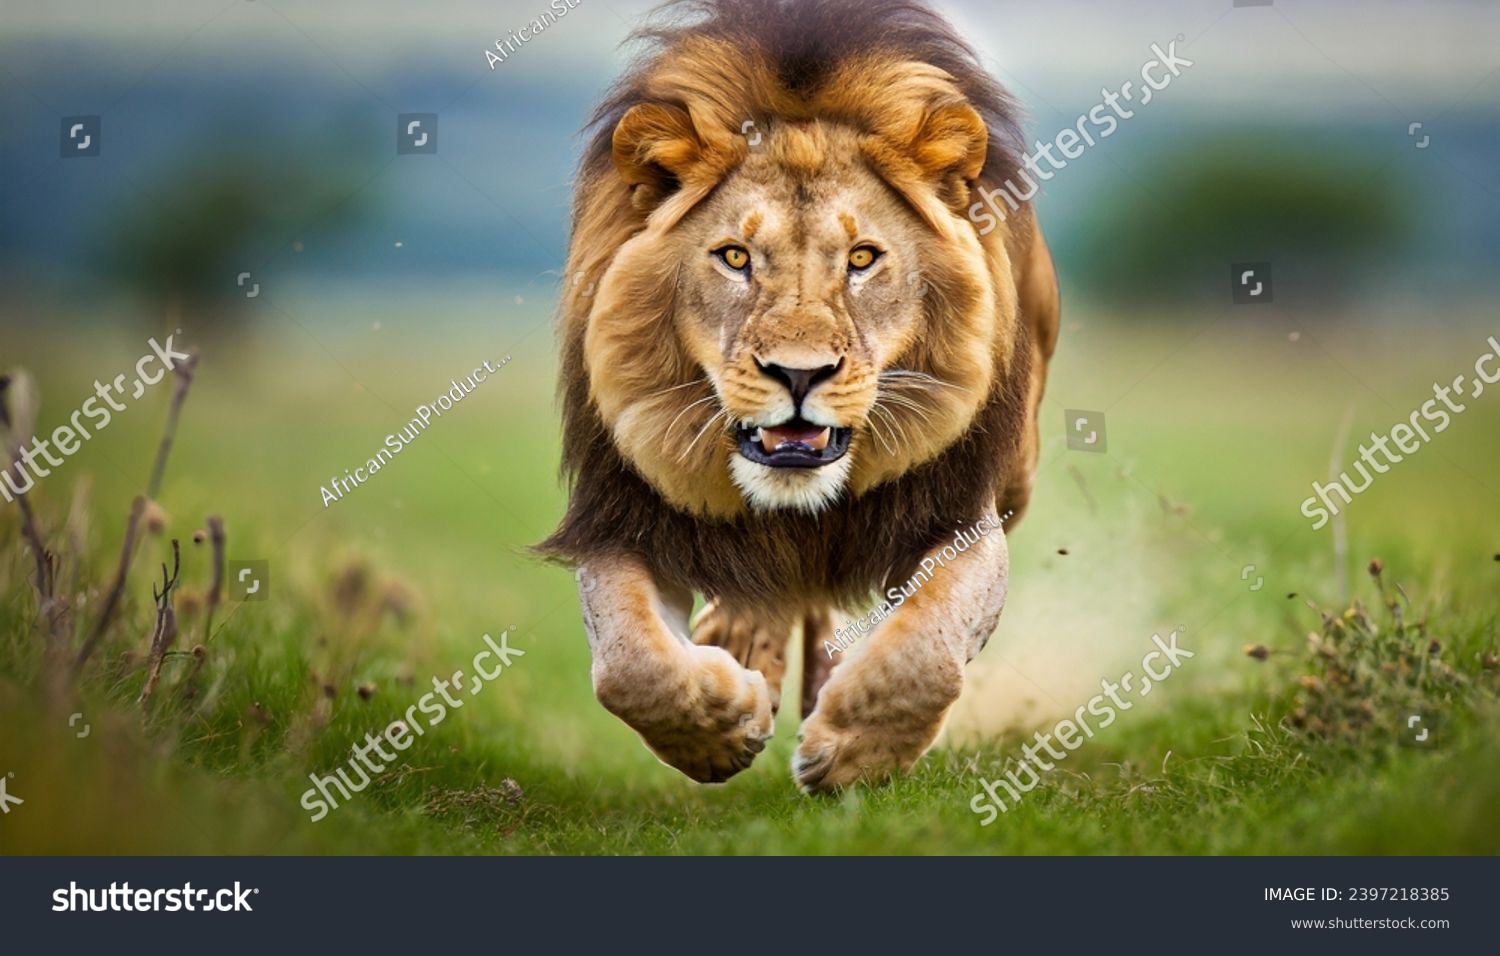 Lion running towards camera ready to charge #2397218385